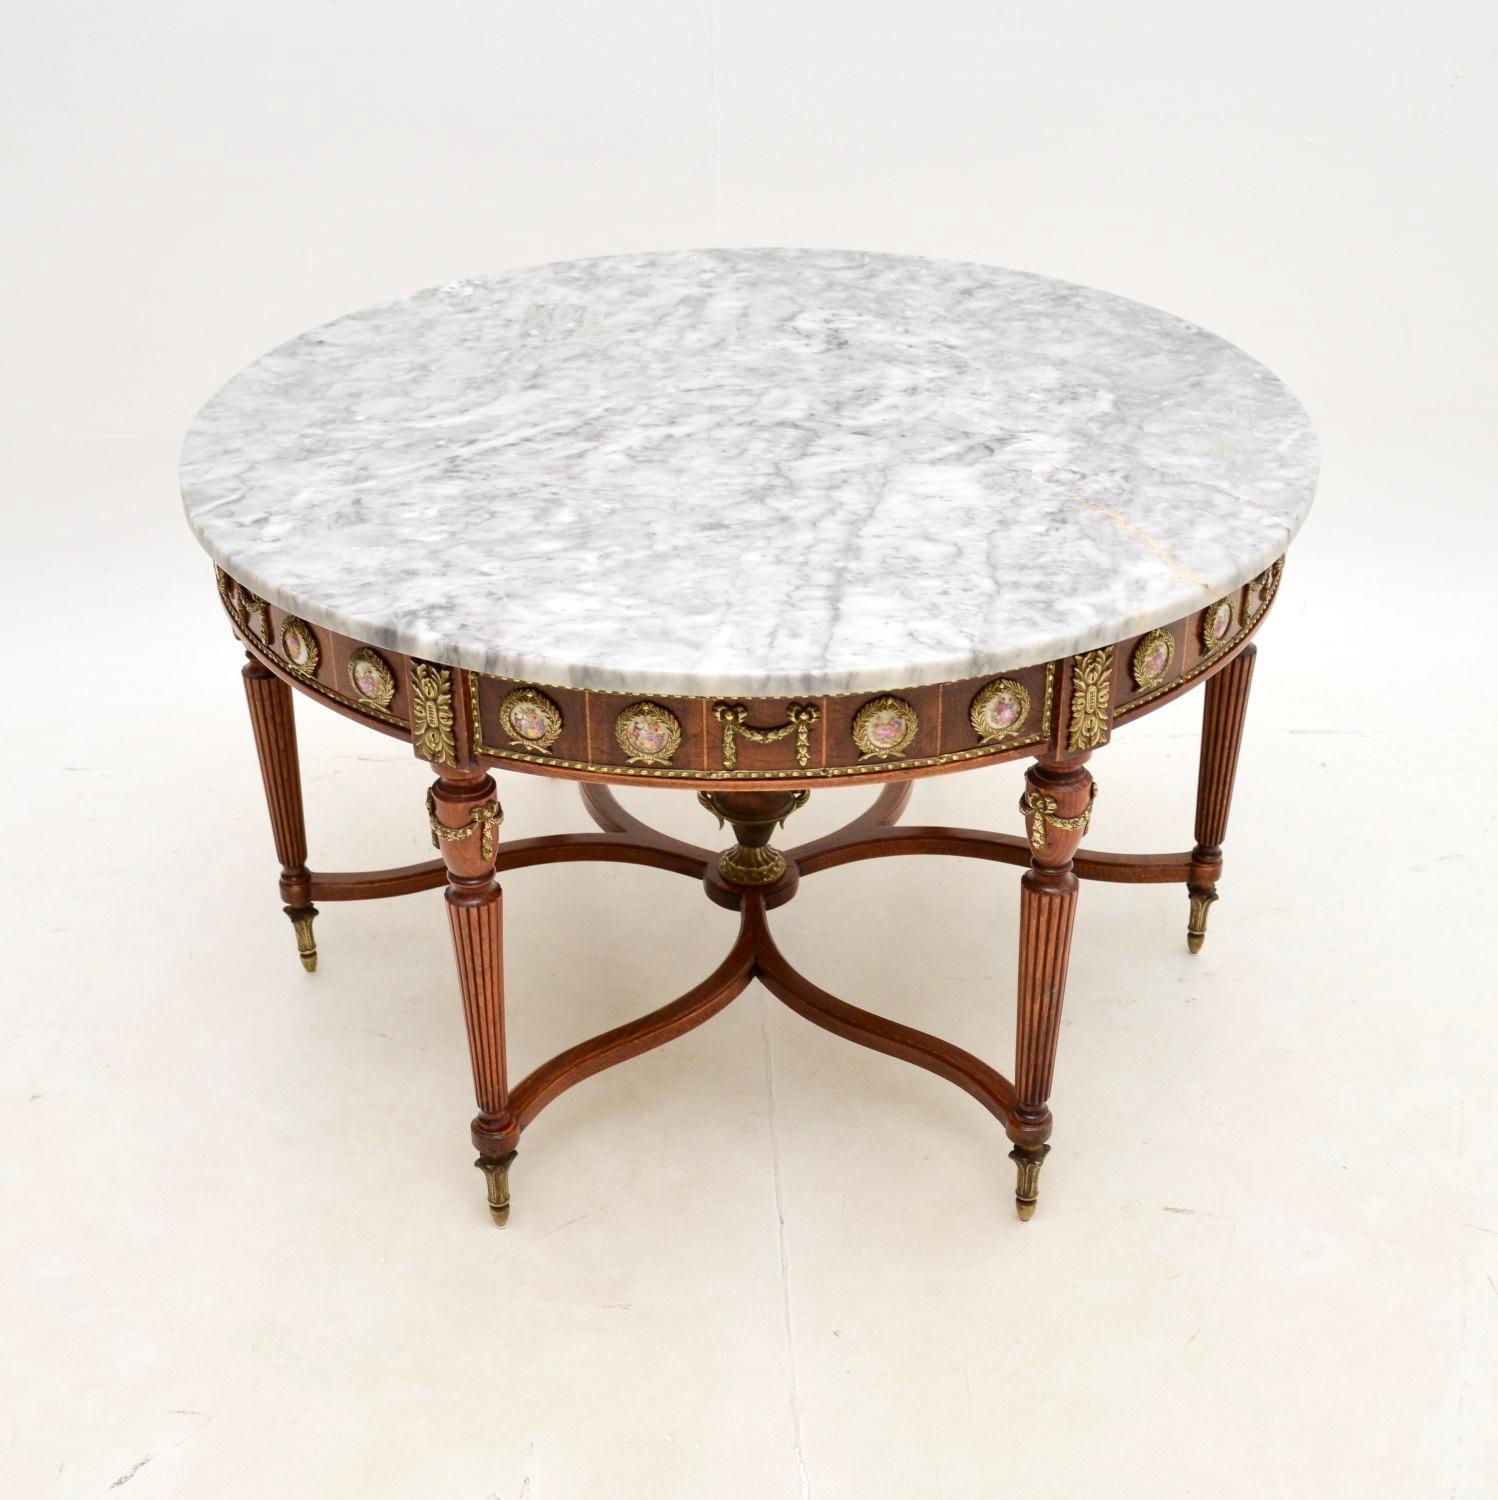 A beautiful and impressive antique French marble top coffee table. This was made in France, it dates from around the 1930’s.

The quality is superb, the frame is made from solid birch and walnut. There are very high quality gilt metal ormolu mounts